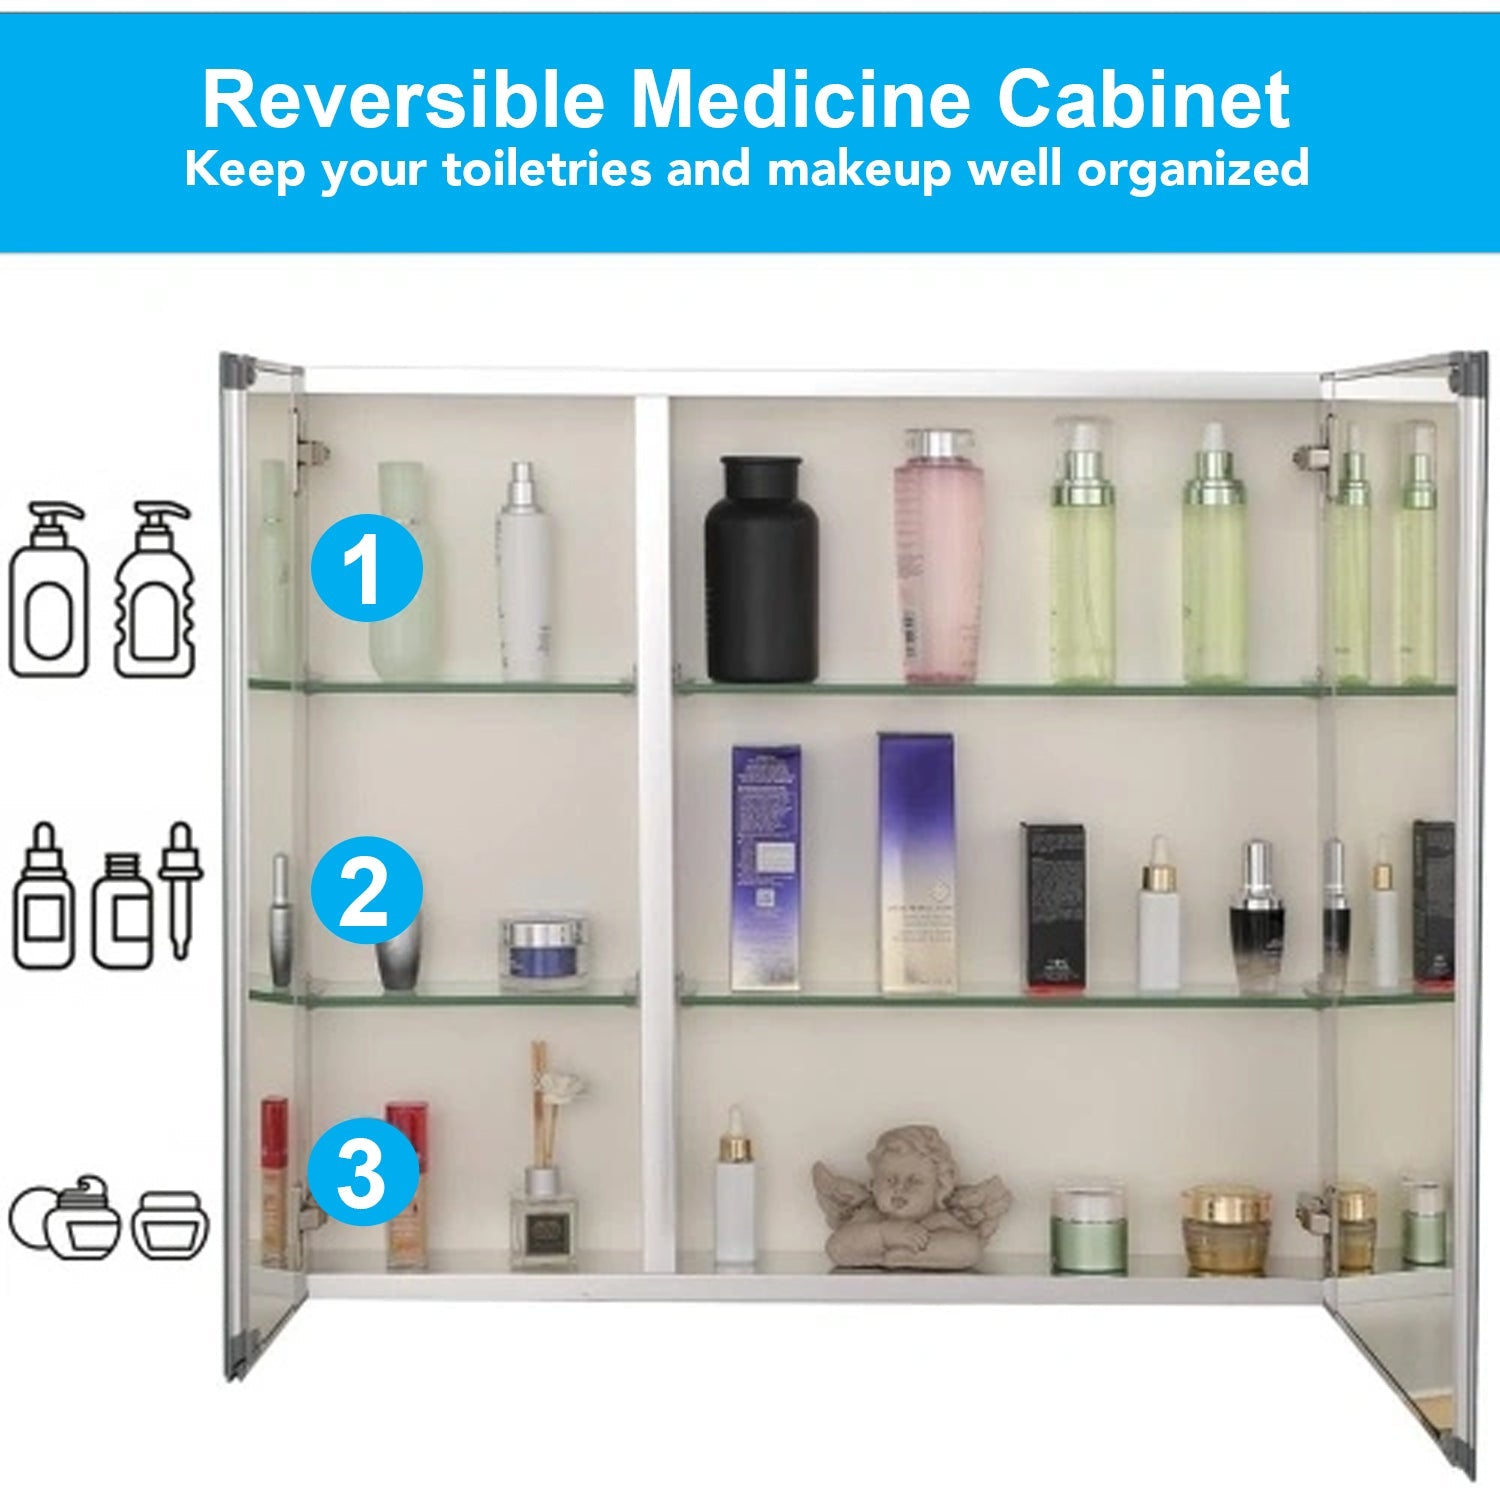 30 x 26 Inches Frameless Medicine Cabinet: Double-Sided Mirror, 2 Doors, 3-Adjustable Shelves, Unique Large &amp; Small Door Design, Soft-Closing, for Bathroom, Bedroom, Hotel - Surface or Recessed Mount